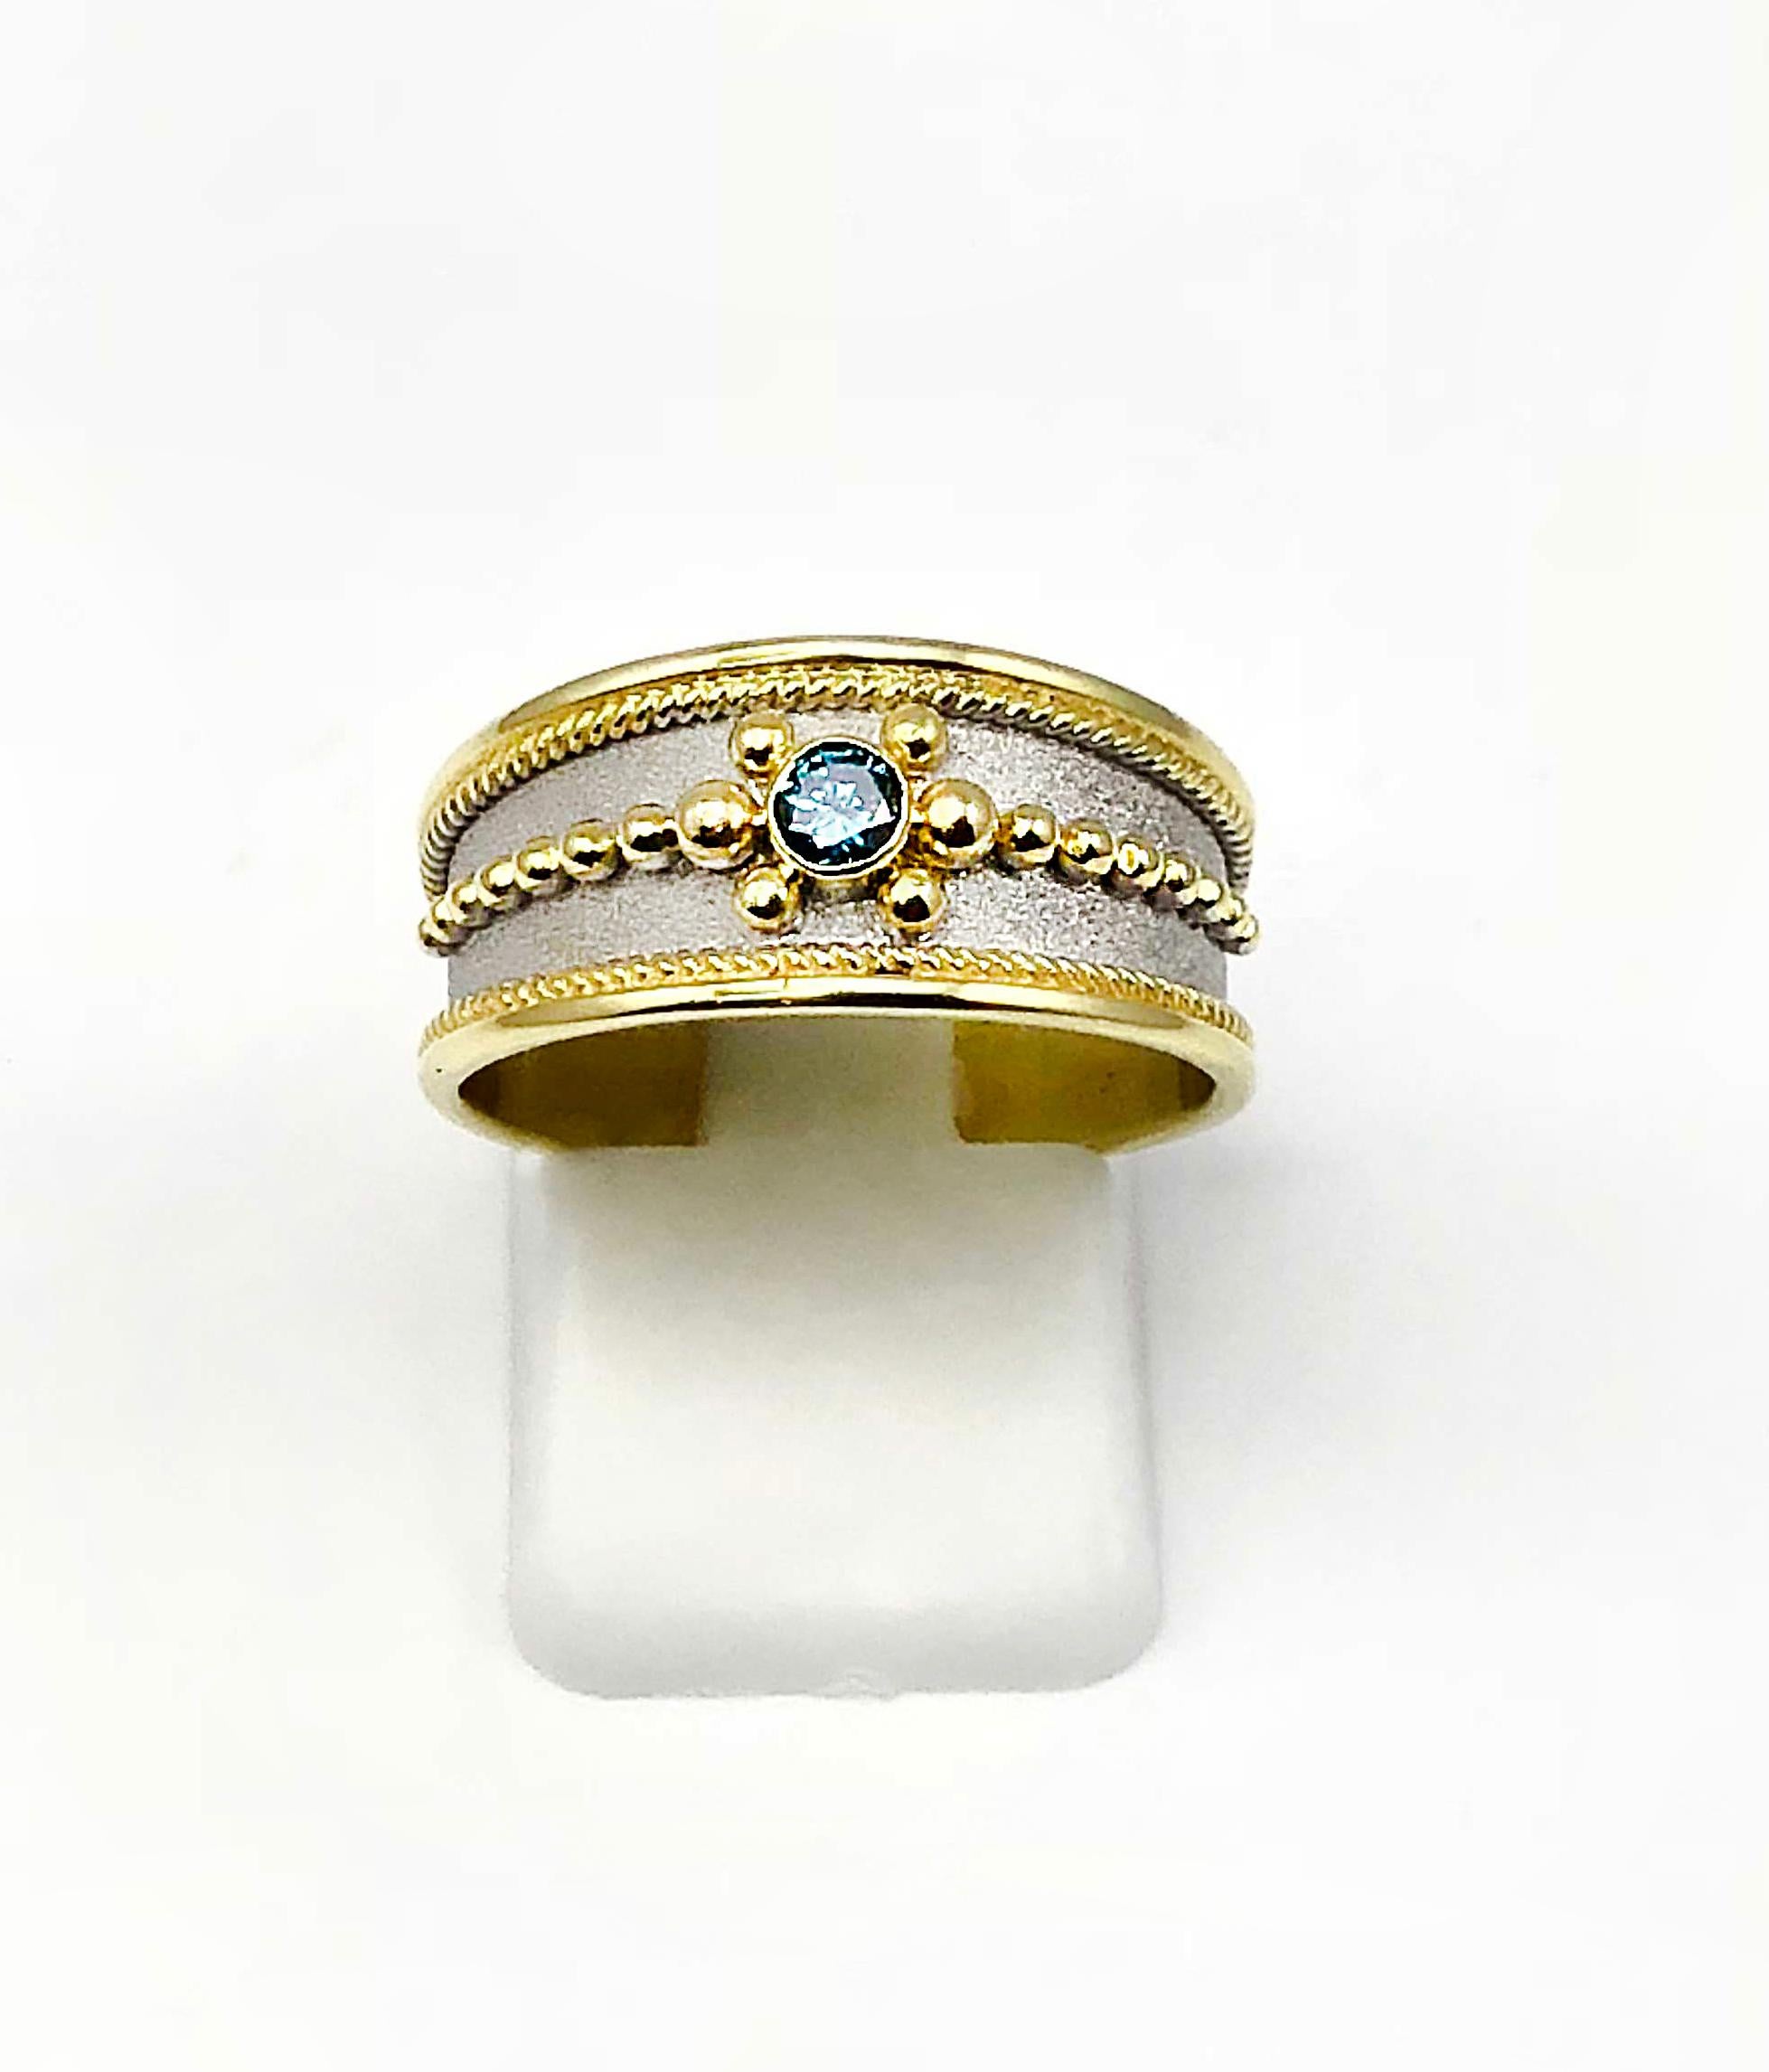 Byzantine Georgios Collections 18 Karat Two Tone Gold Blue Diamond Ring with Granulation